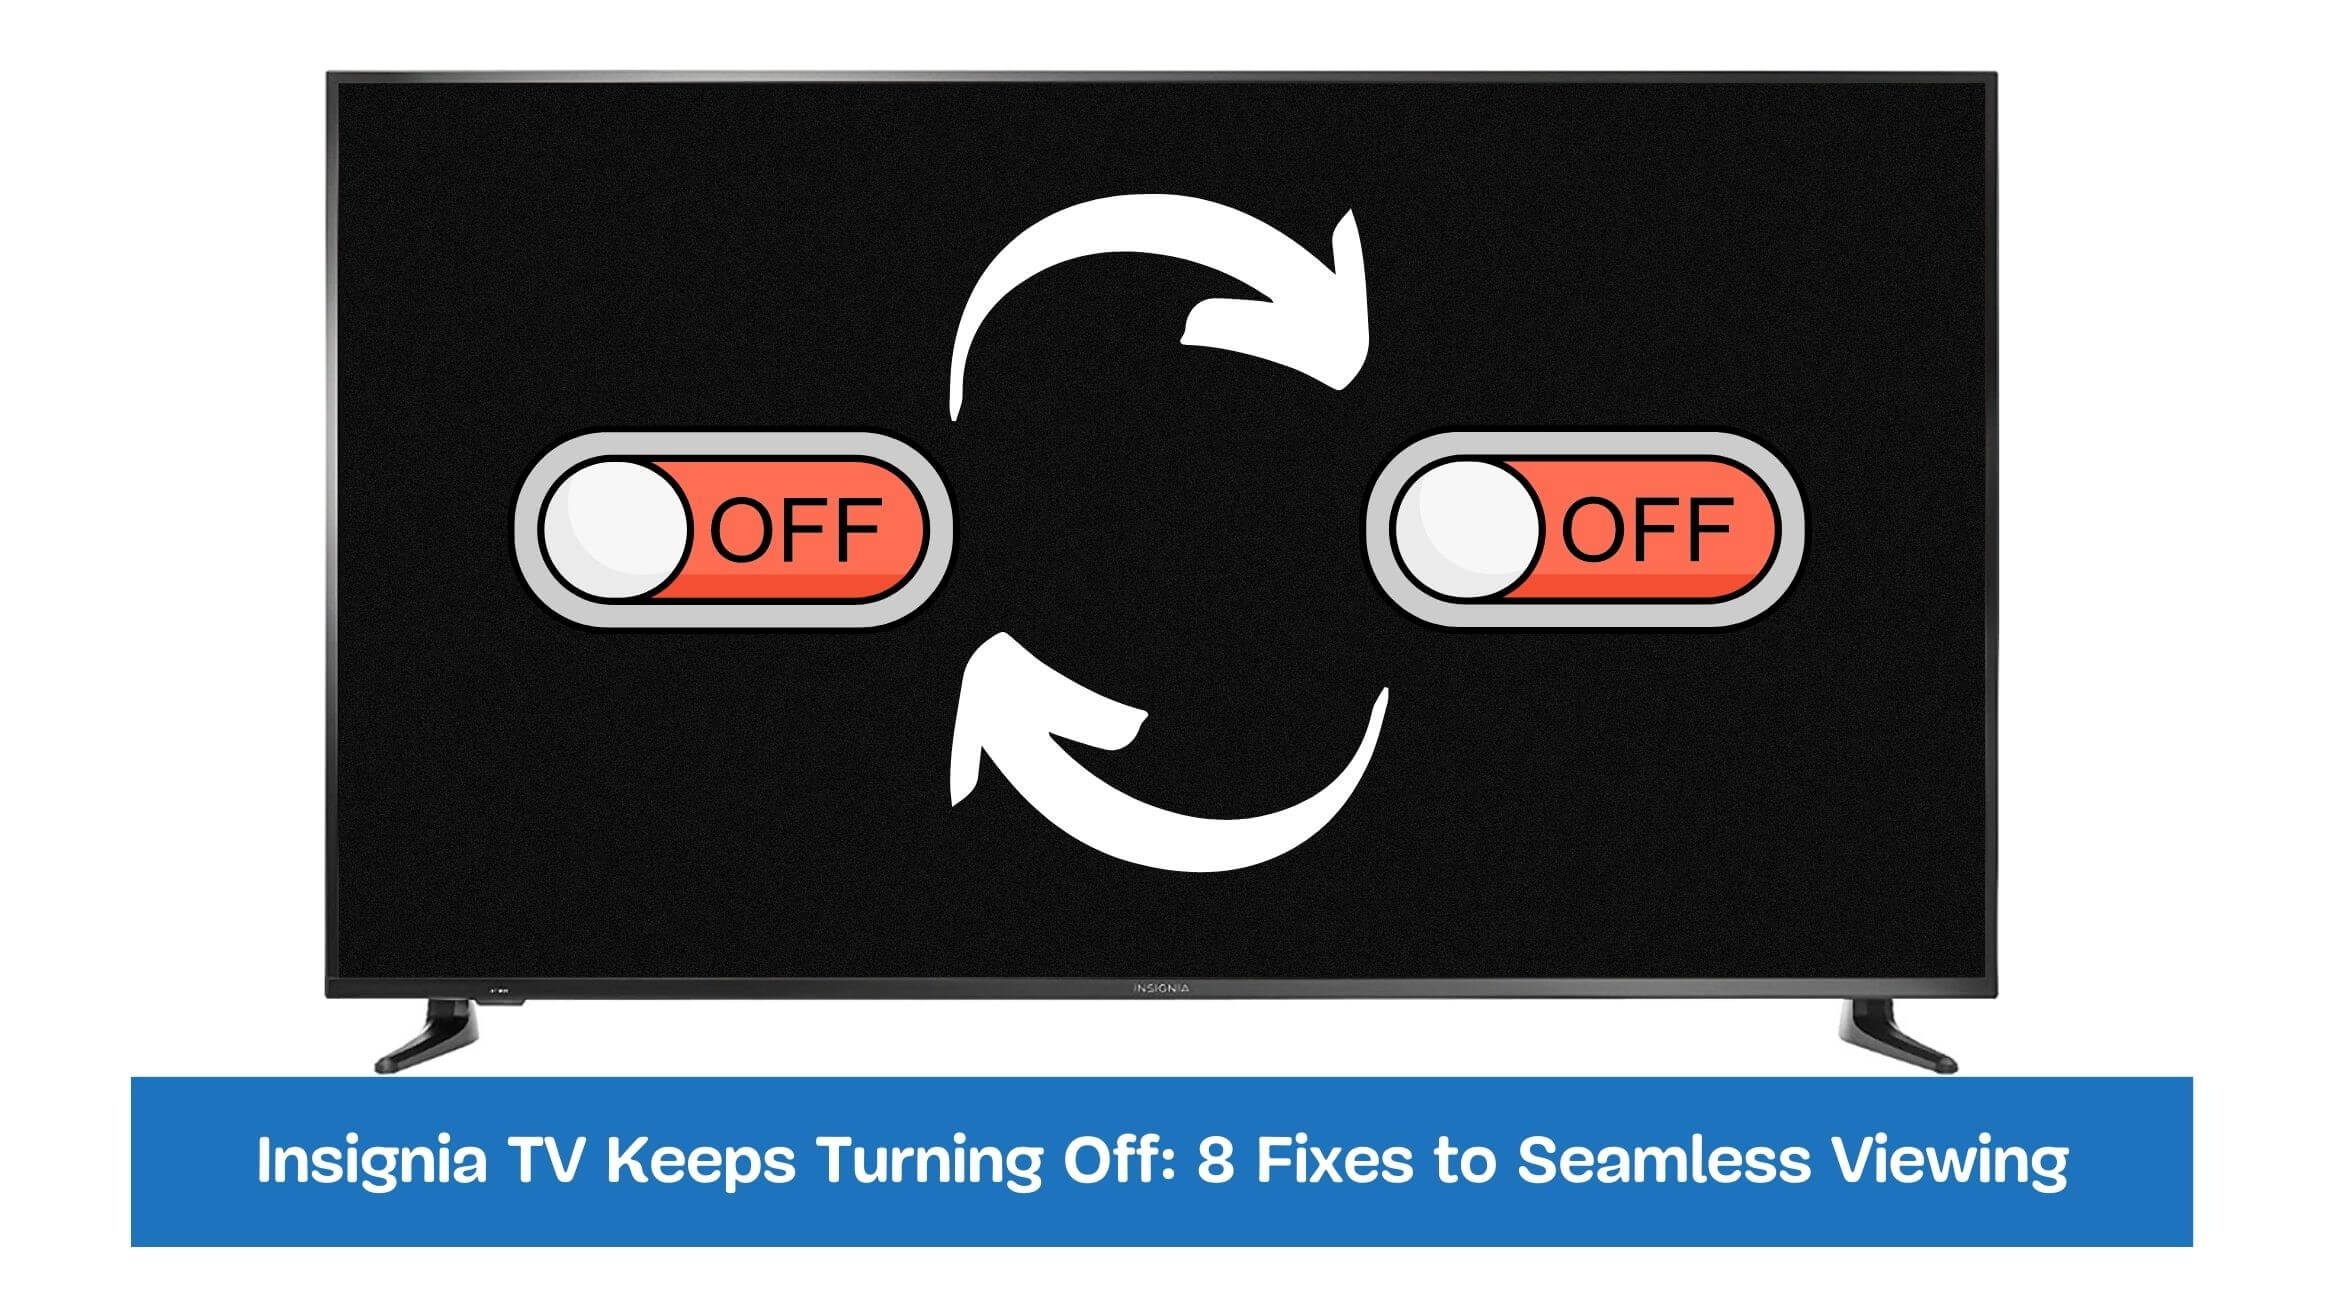 Insignia TV Keeps Turning Off: 8 Fixes to Seamless Viewing